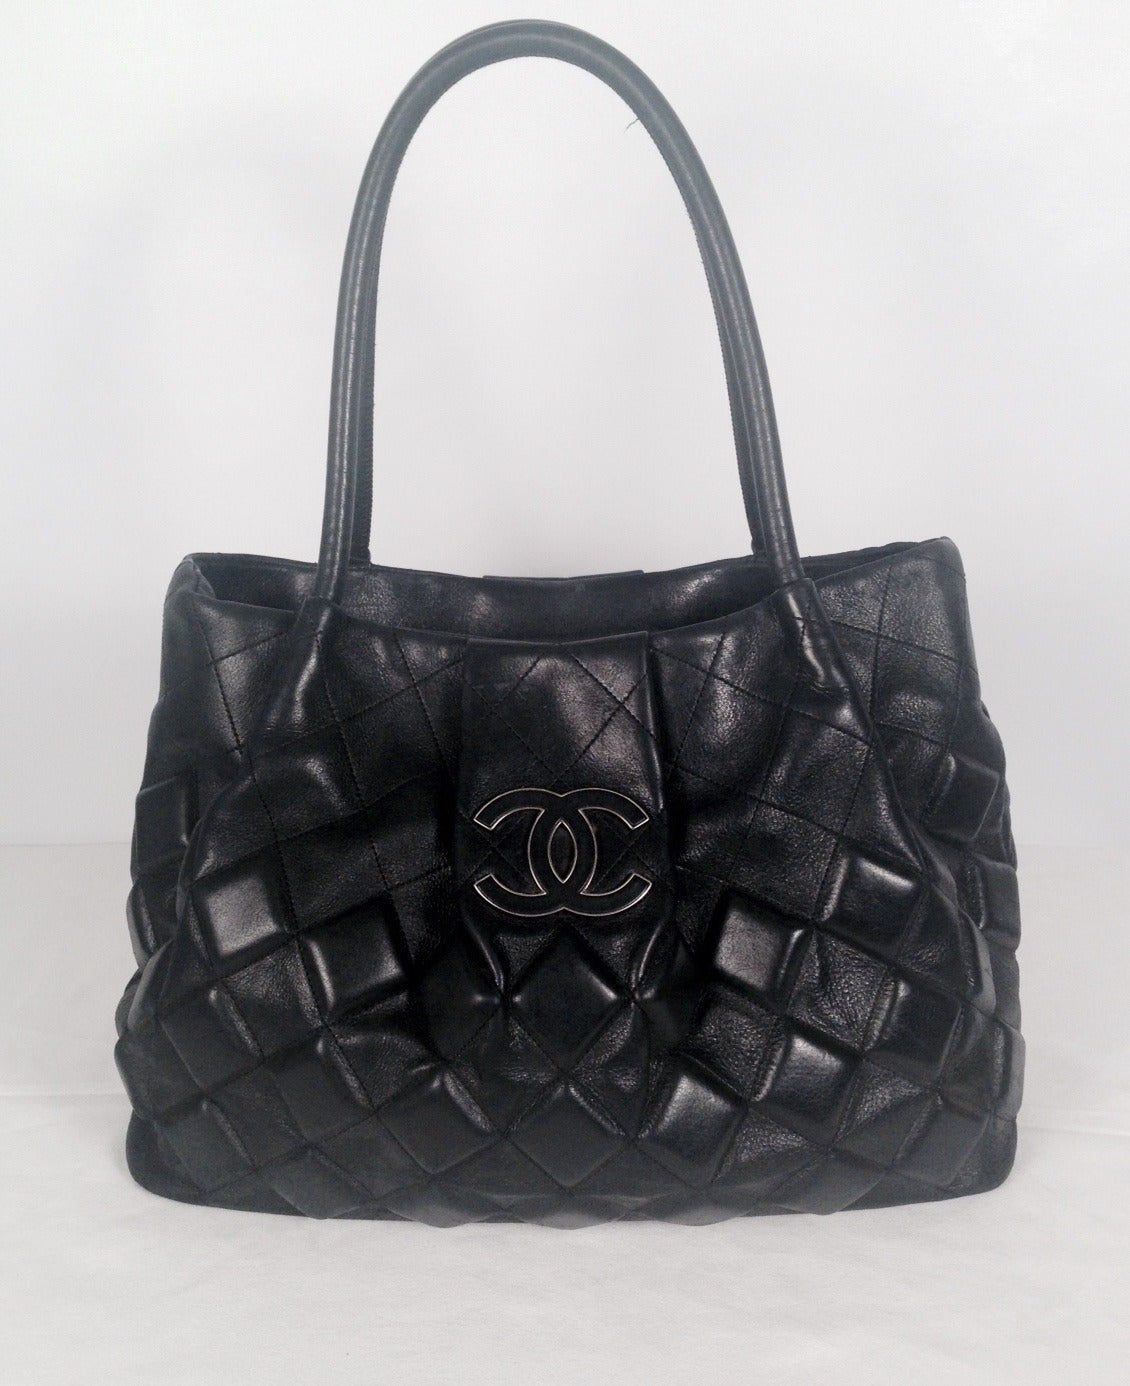 Hard to Find Chanel Deep Navy Tote Diamond Topstitched Lambskin In Excellent Condition For Sale In Palm Beach, FL